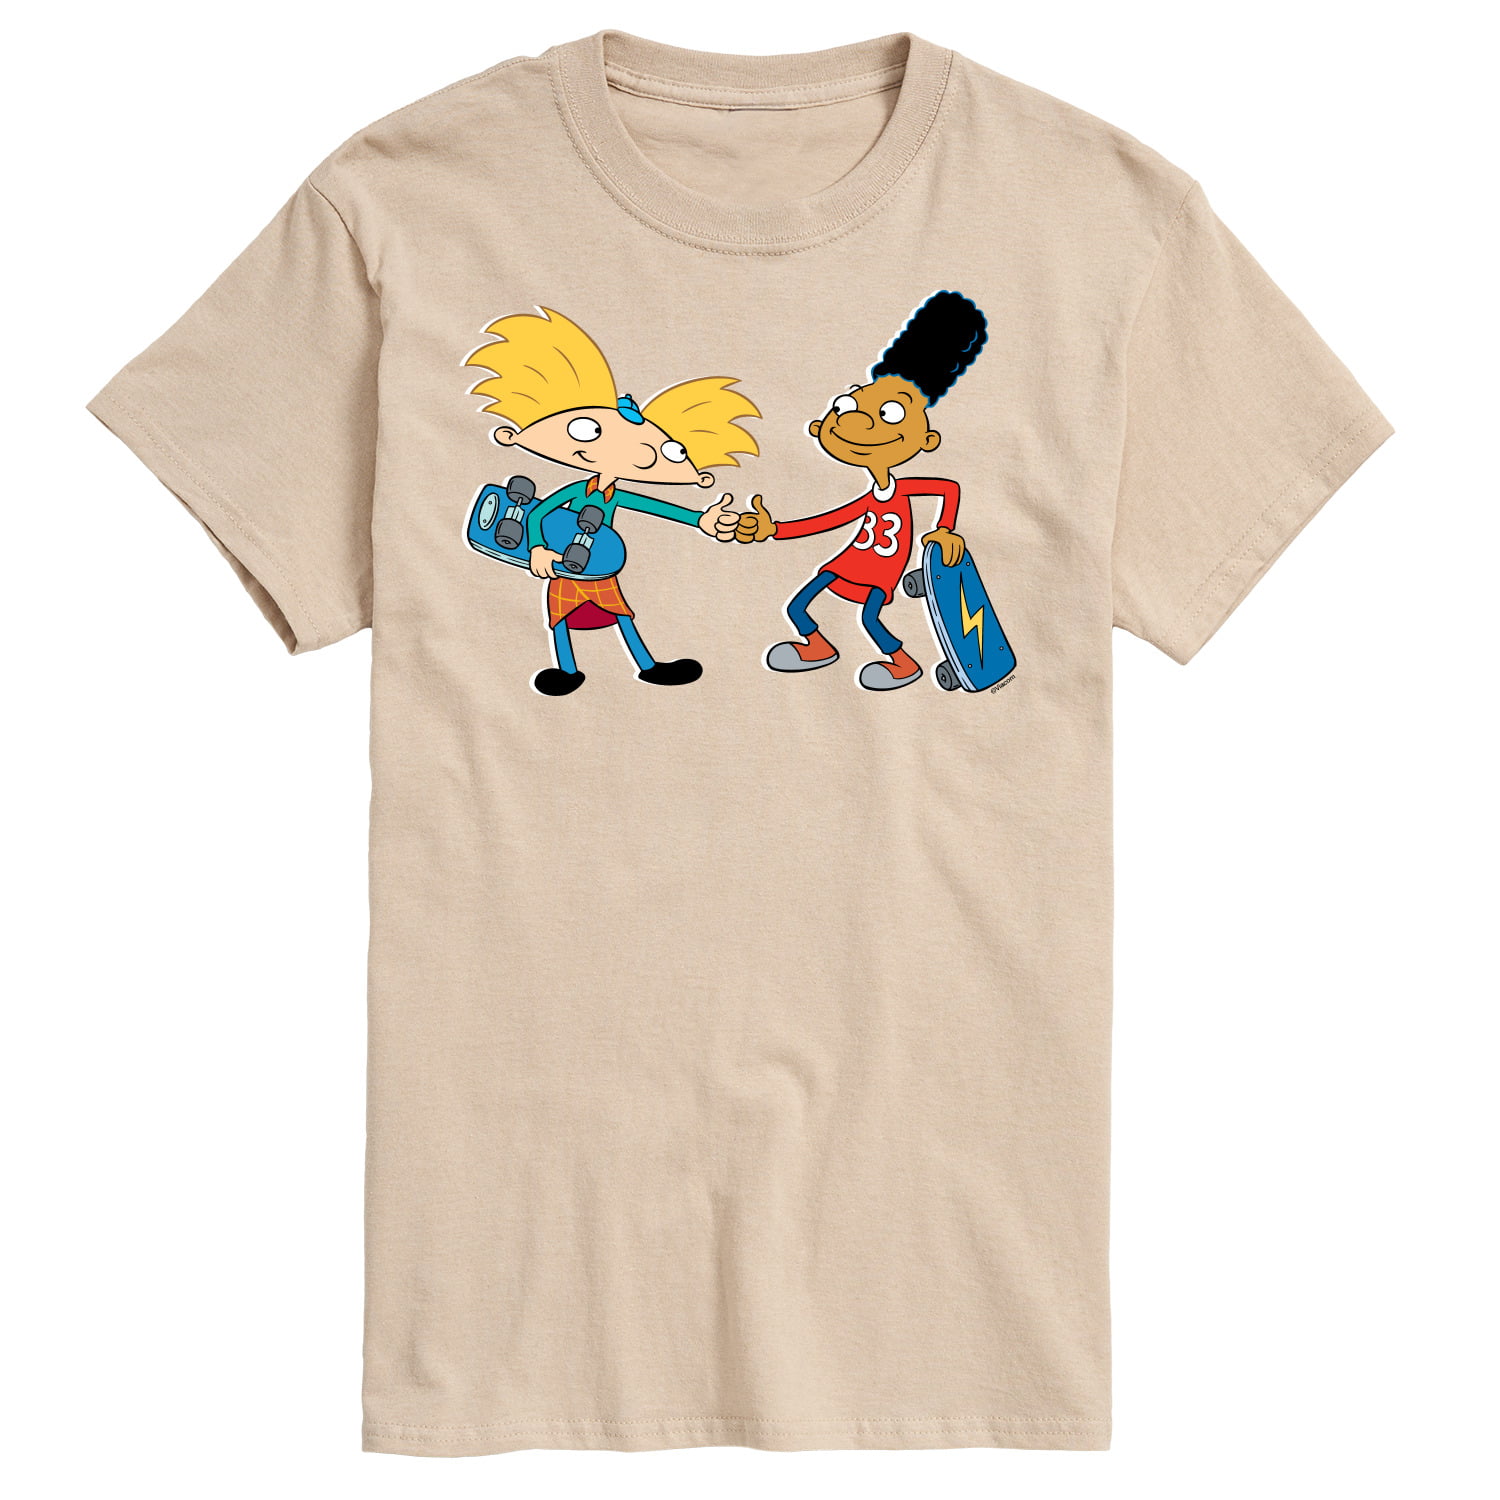 Hey Arnold! - Arnold and Gerald Skateboard - Men's Short Sleeve Graphic T-Shirt, Size: 2XL, Beige